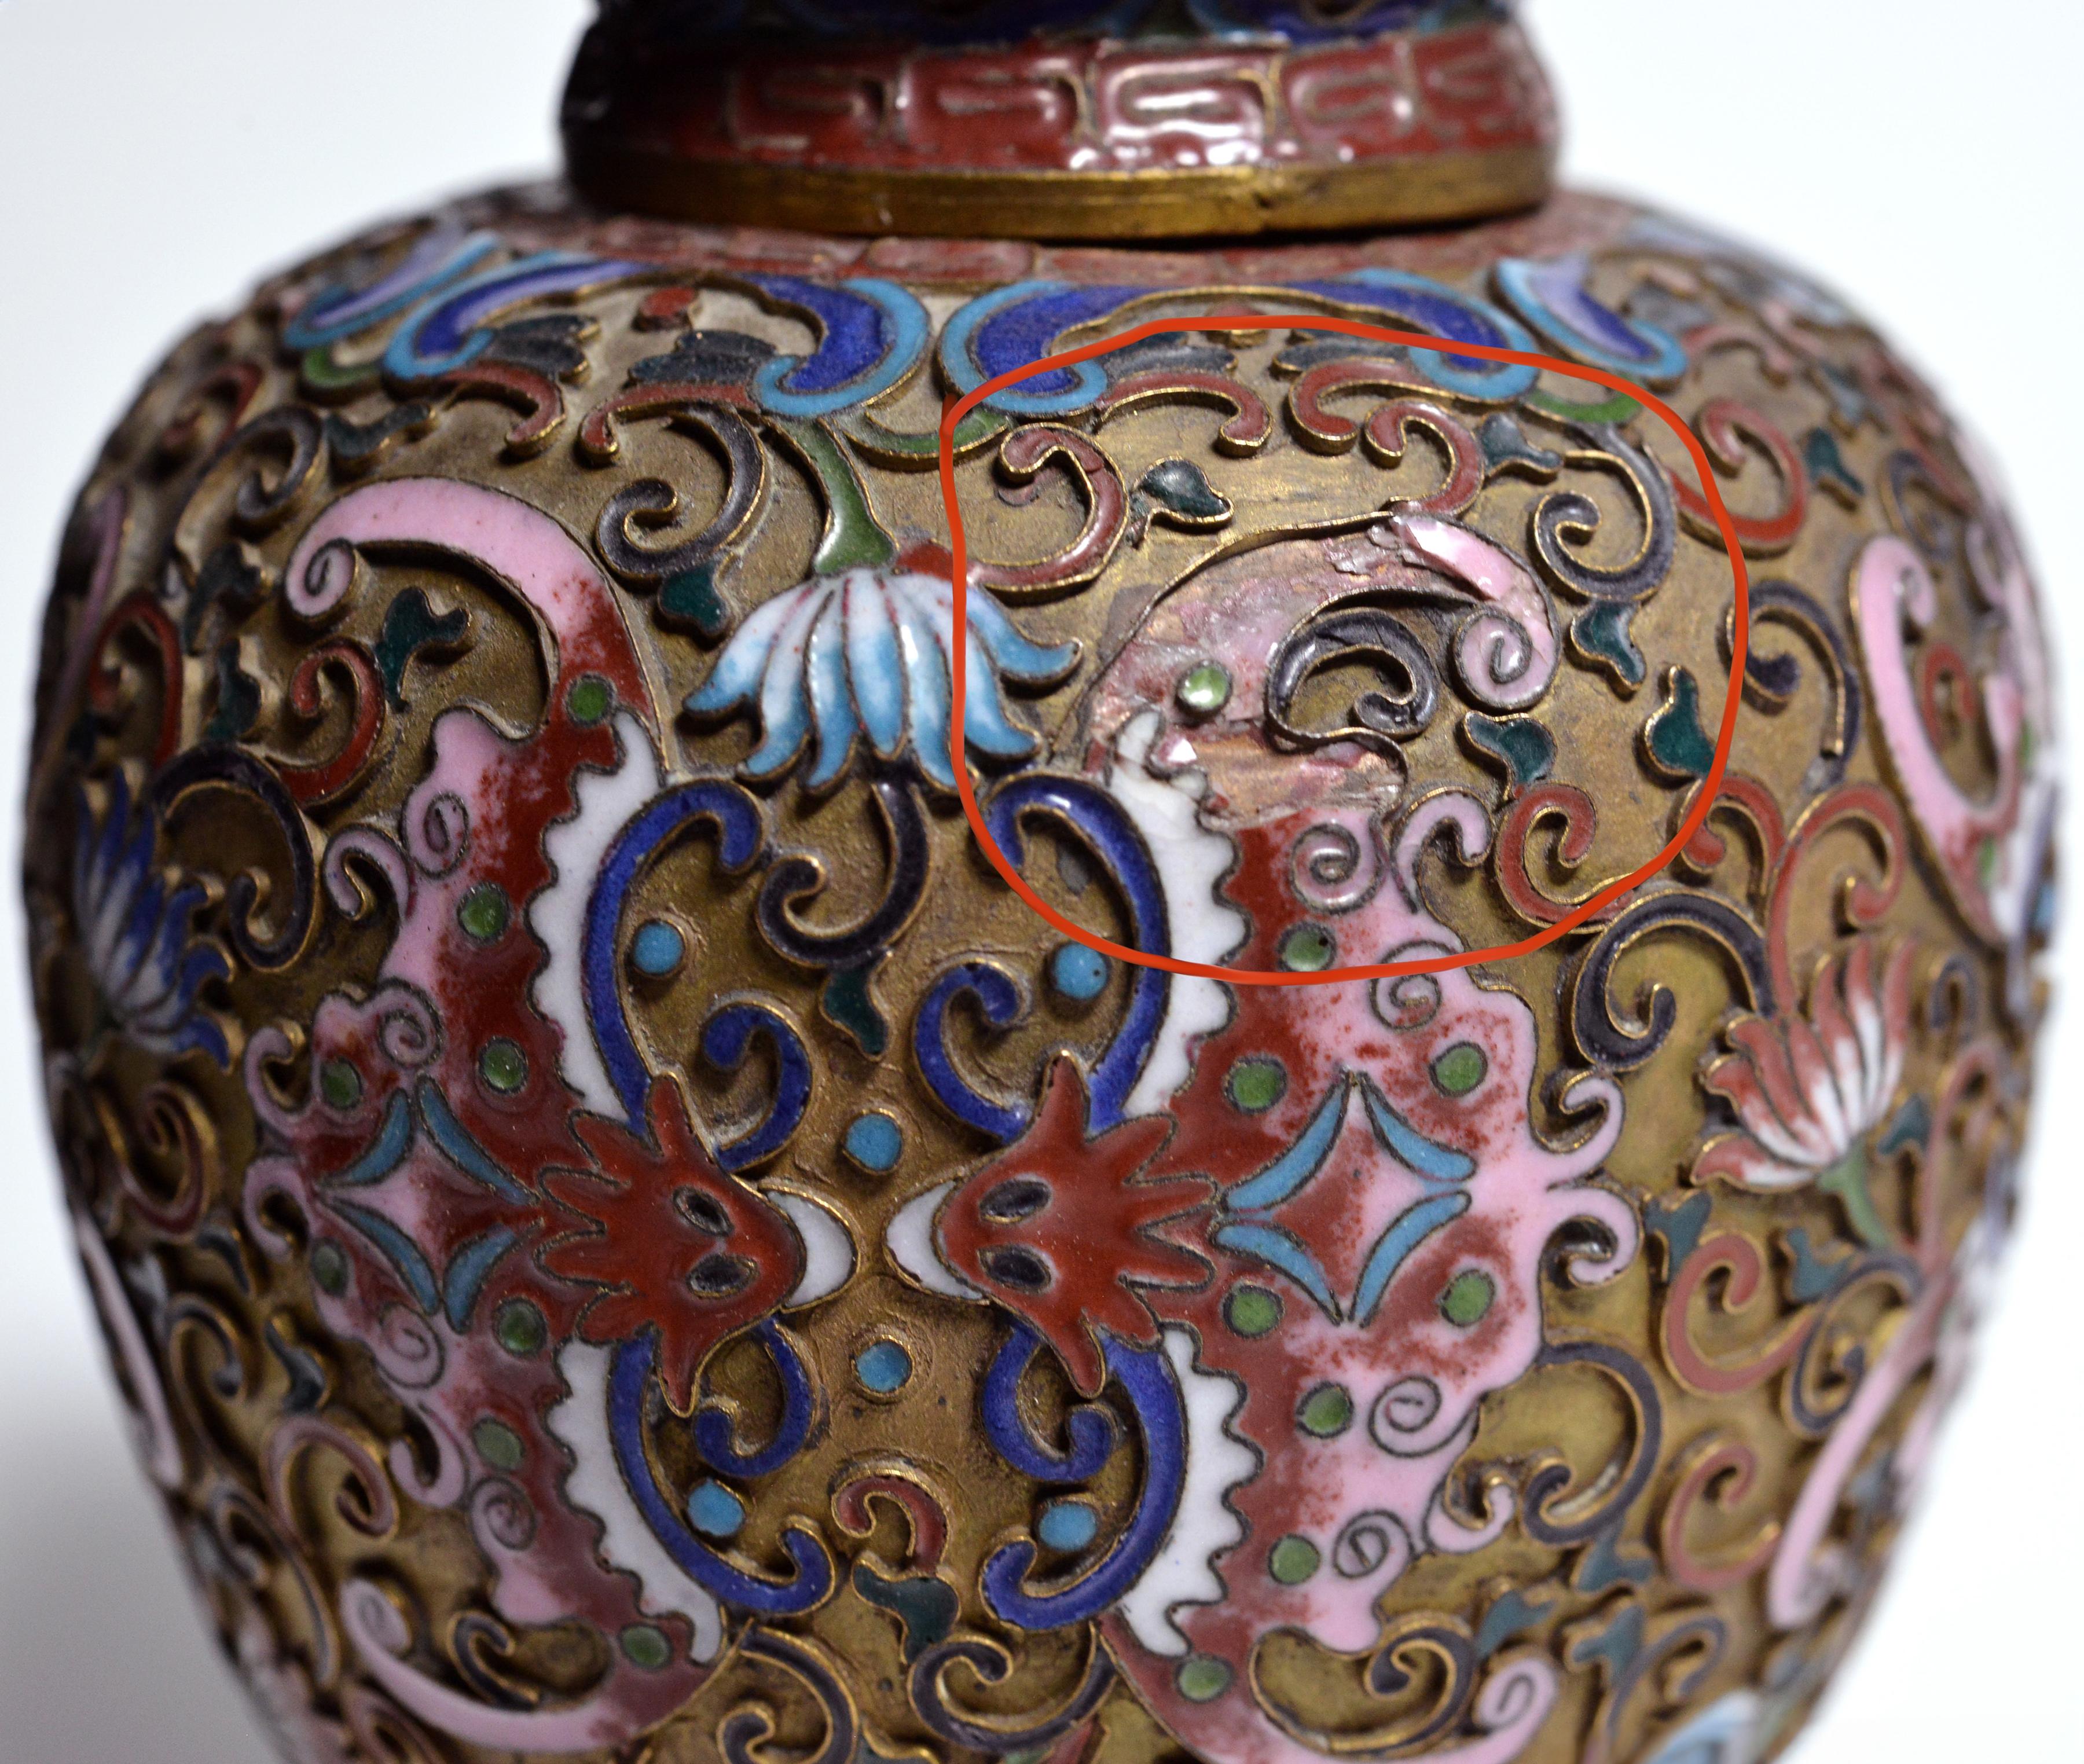 Antique Chinese Tea Caddy Cloisonne Enamels on Copper 19th century For Sale 4